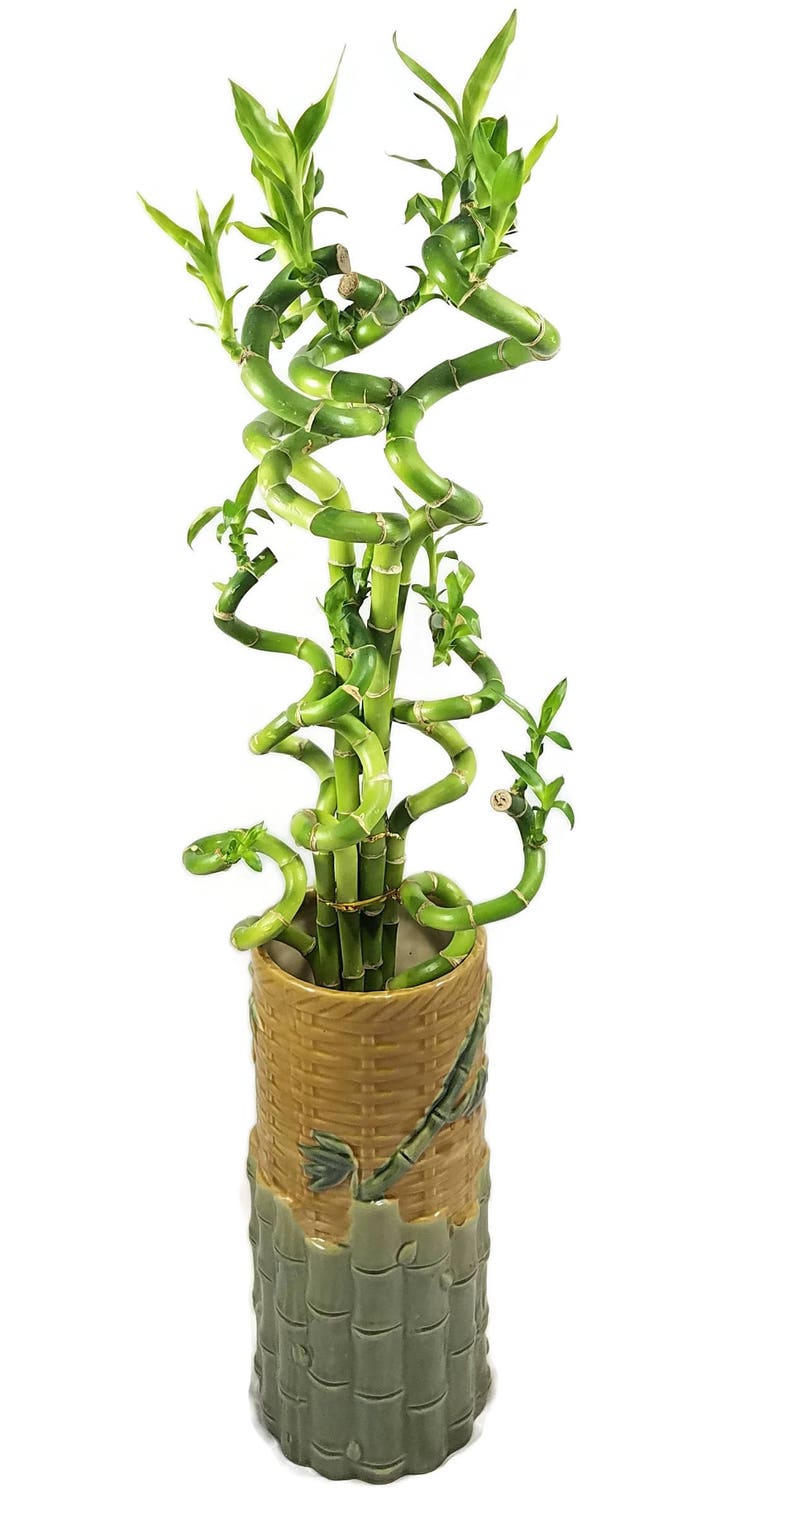 Set of 10 Curly Spiral Lucky Bamboo Stalks 30 Inches, 24 Inches, 18 Inches, 12 Inches, 8 Inches, or 6 Inches Long image 4